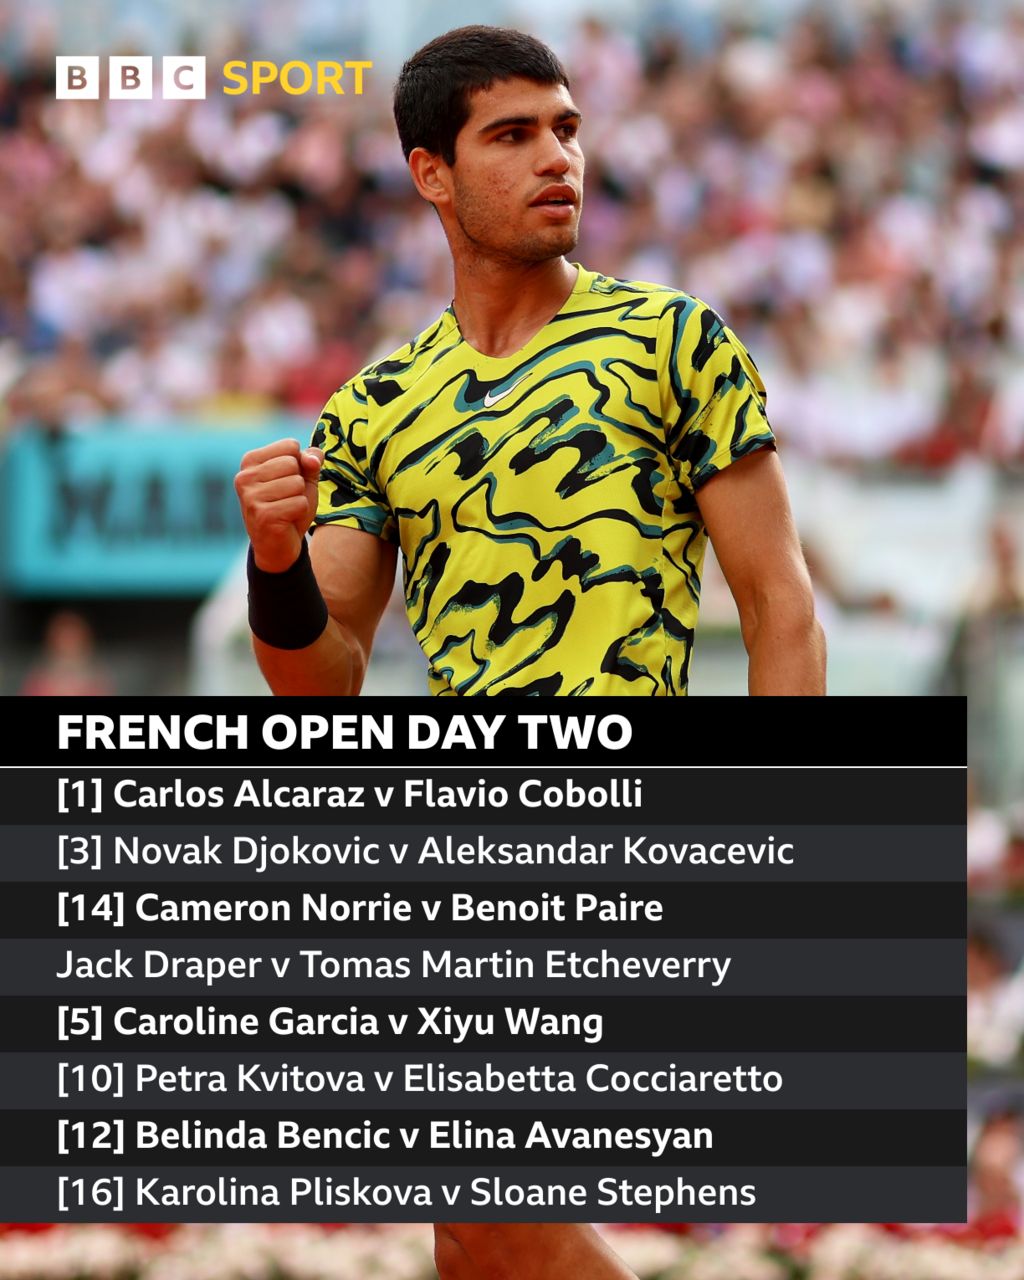 The day two matches at the French Open includes Carlos Alcaraz against Flavio Cobolli